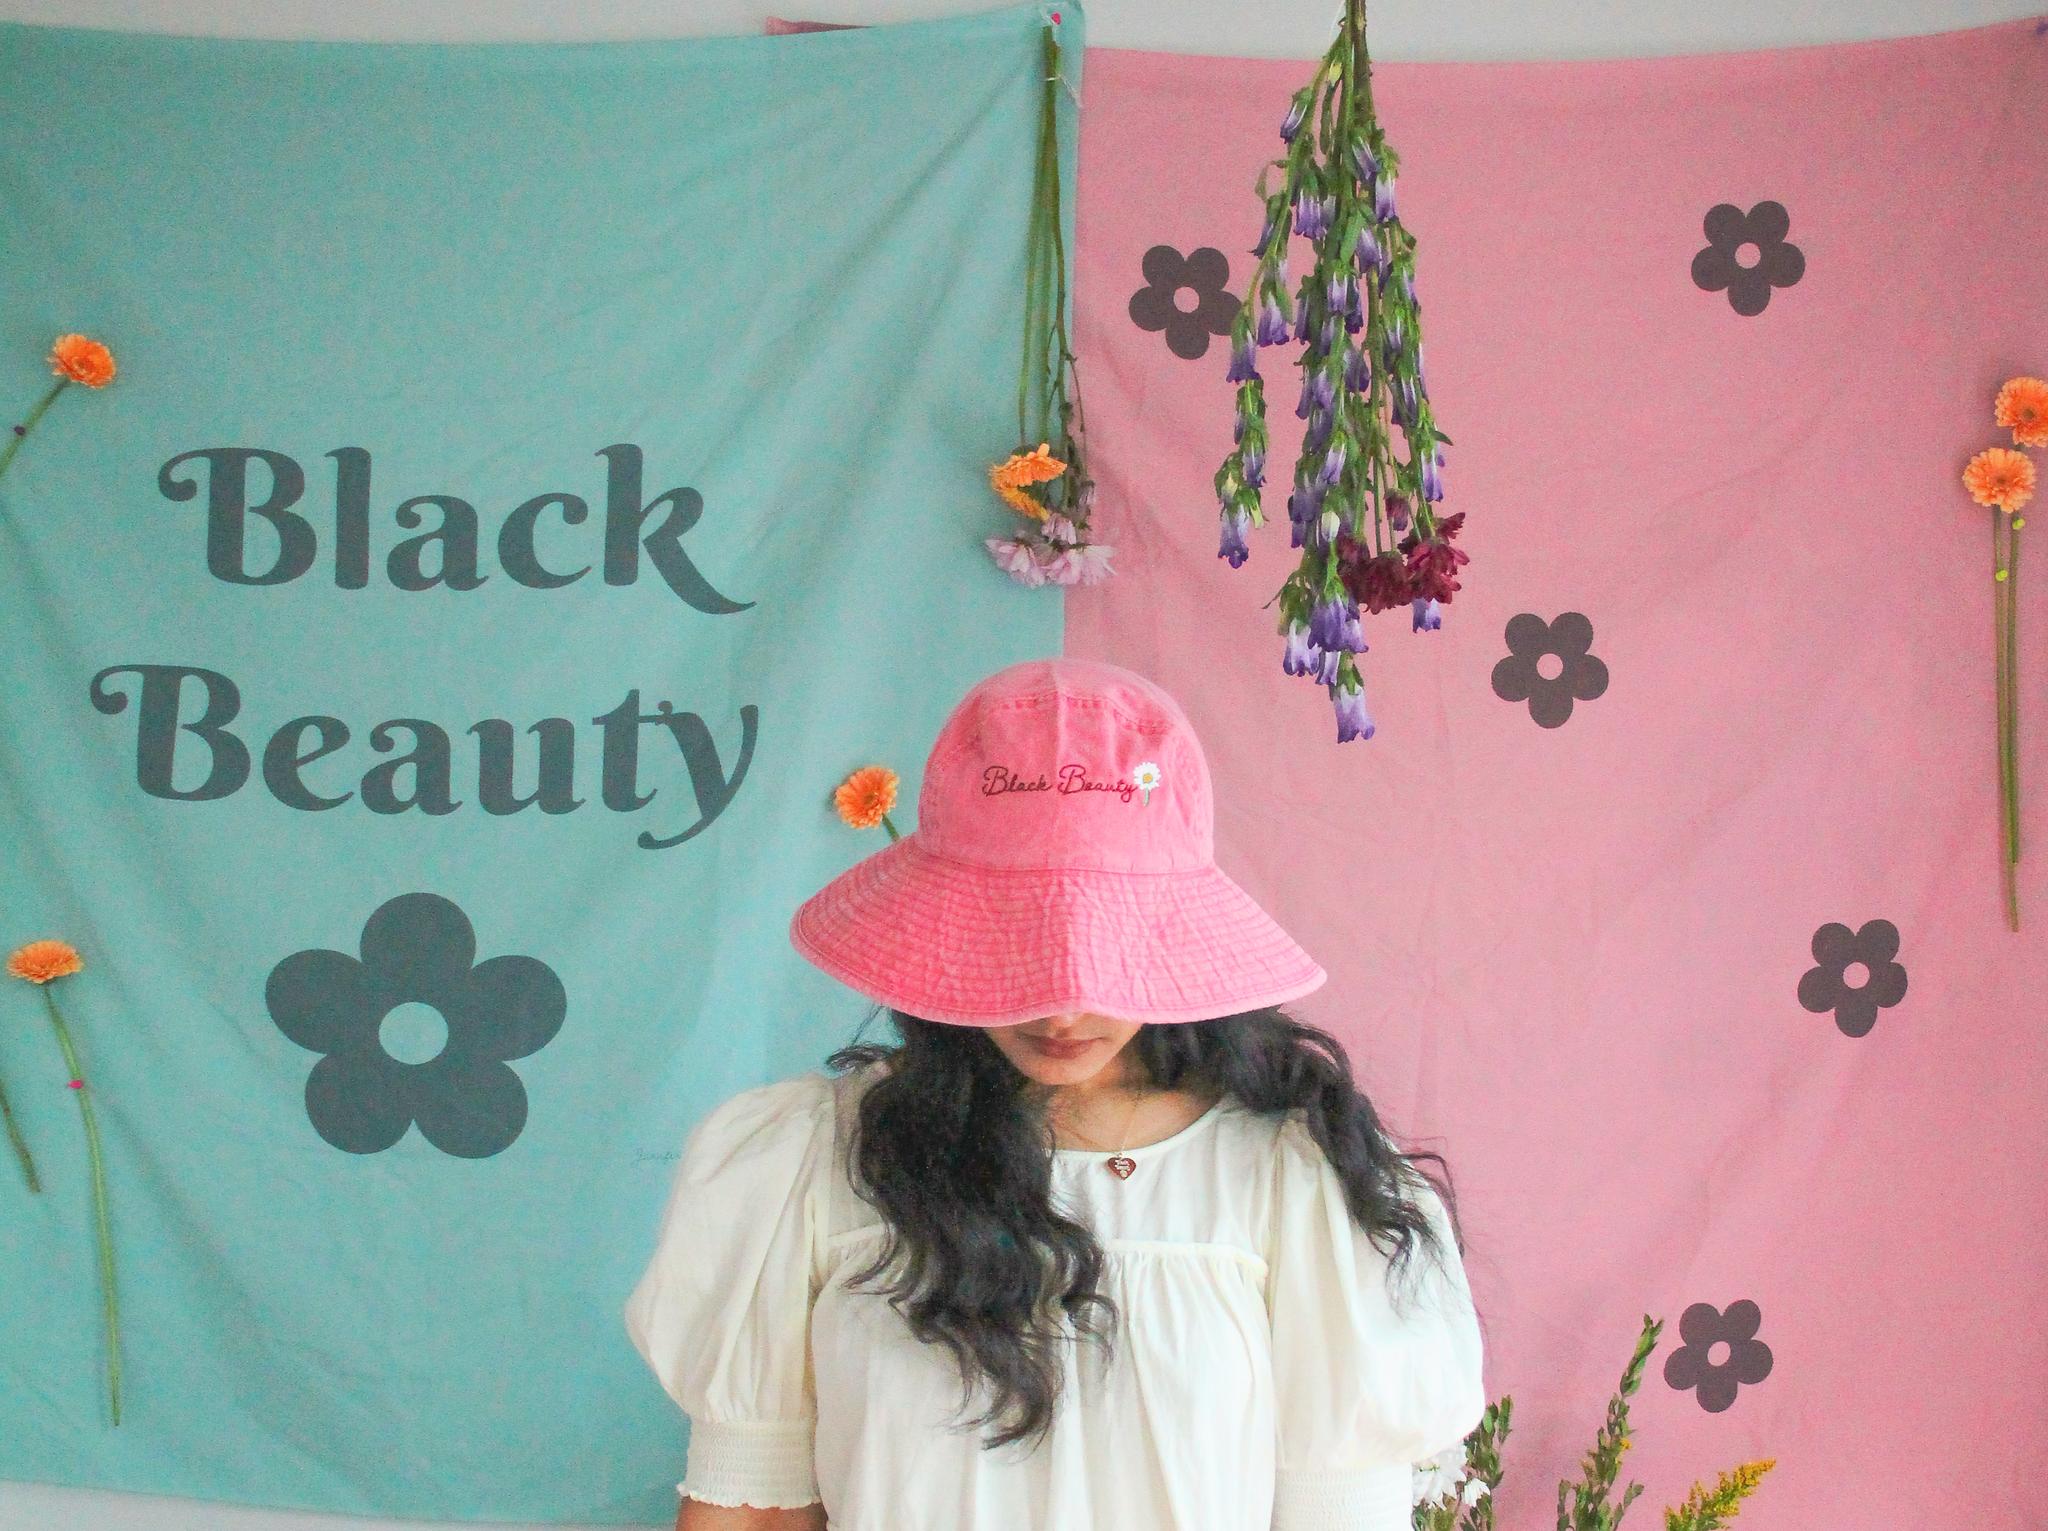 The Black Beauty Collection